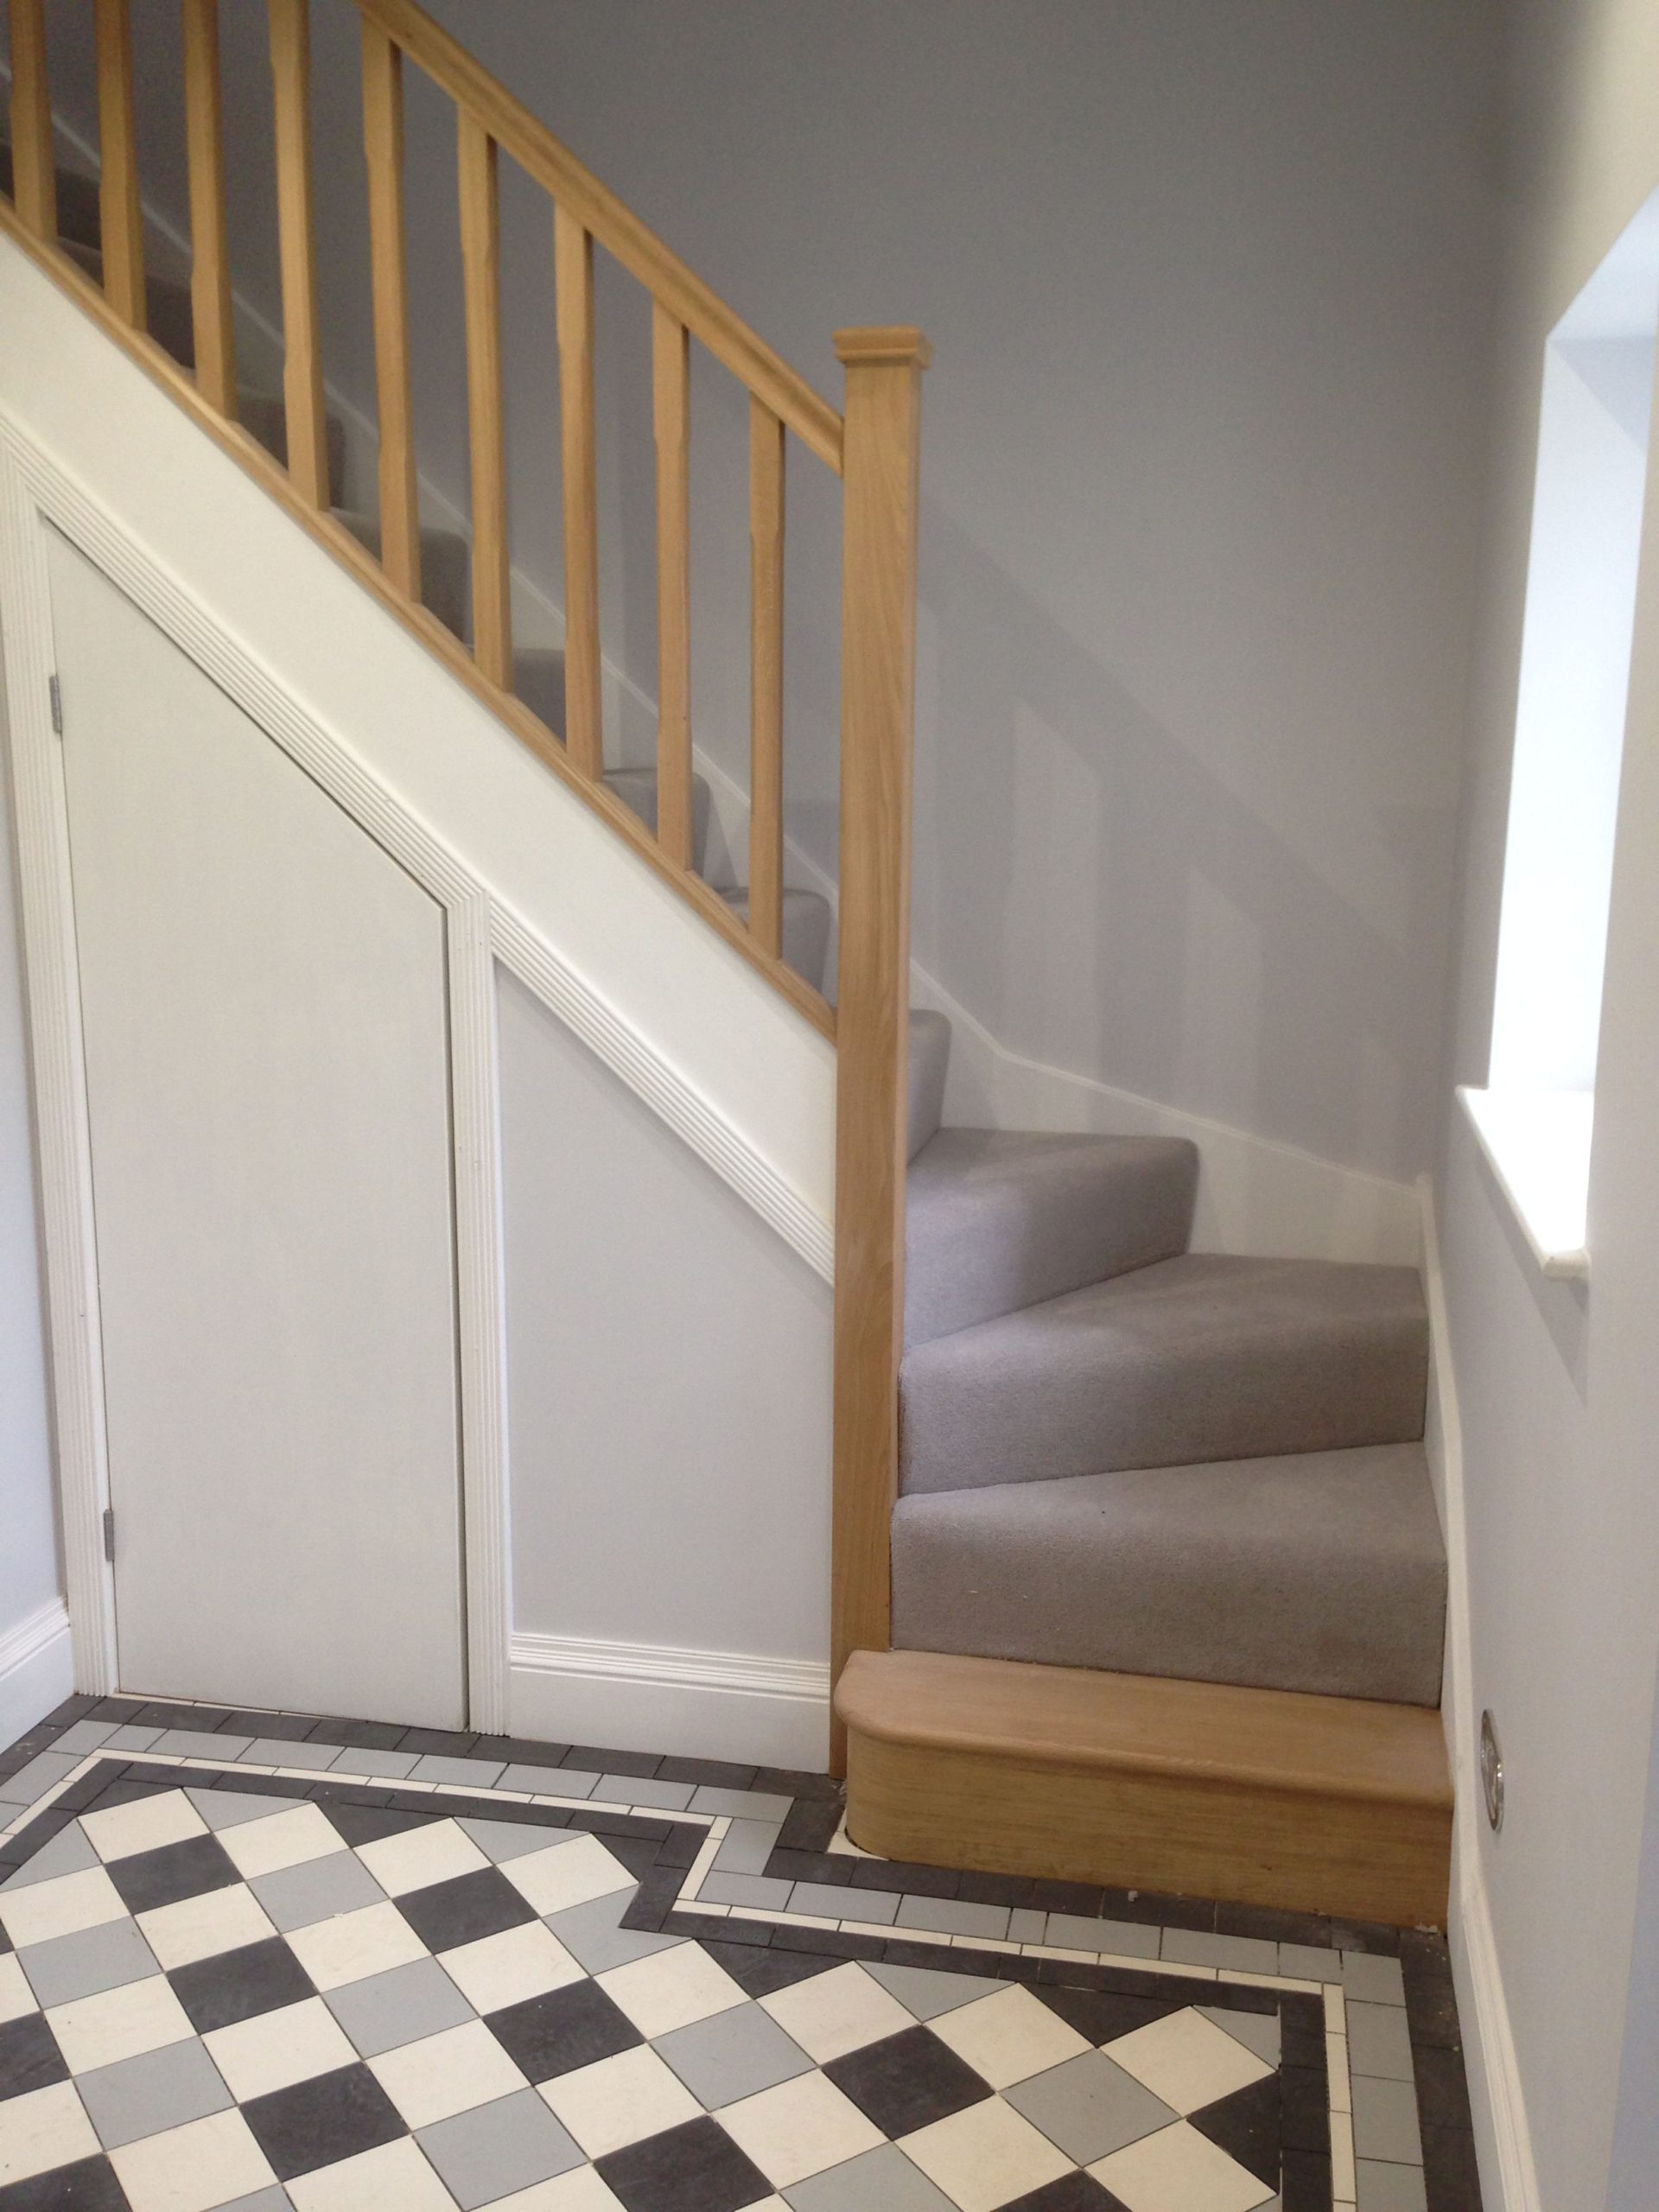 Oak Handrails for Stairs